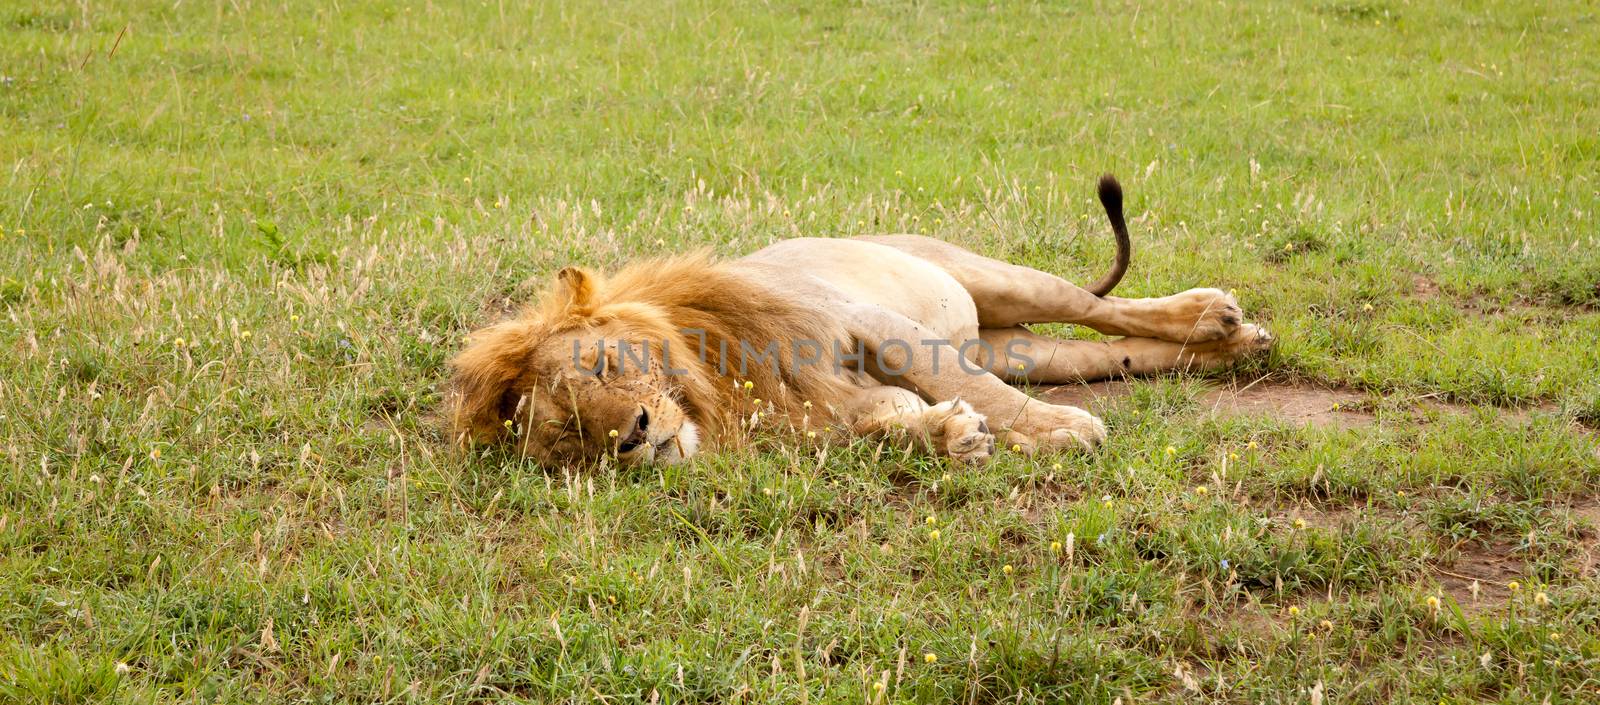 Big lion resting in the grass in the meadow by 25ehaag6